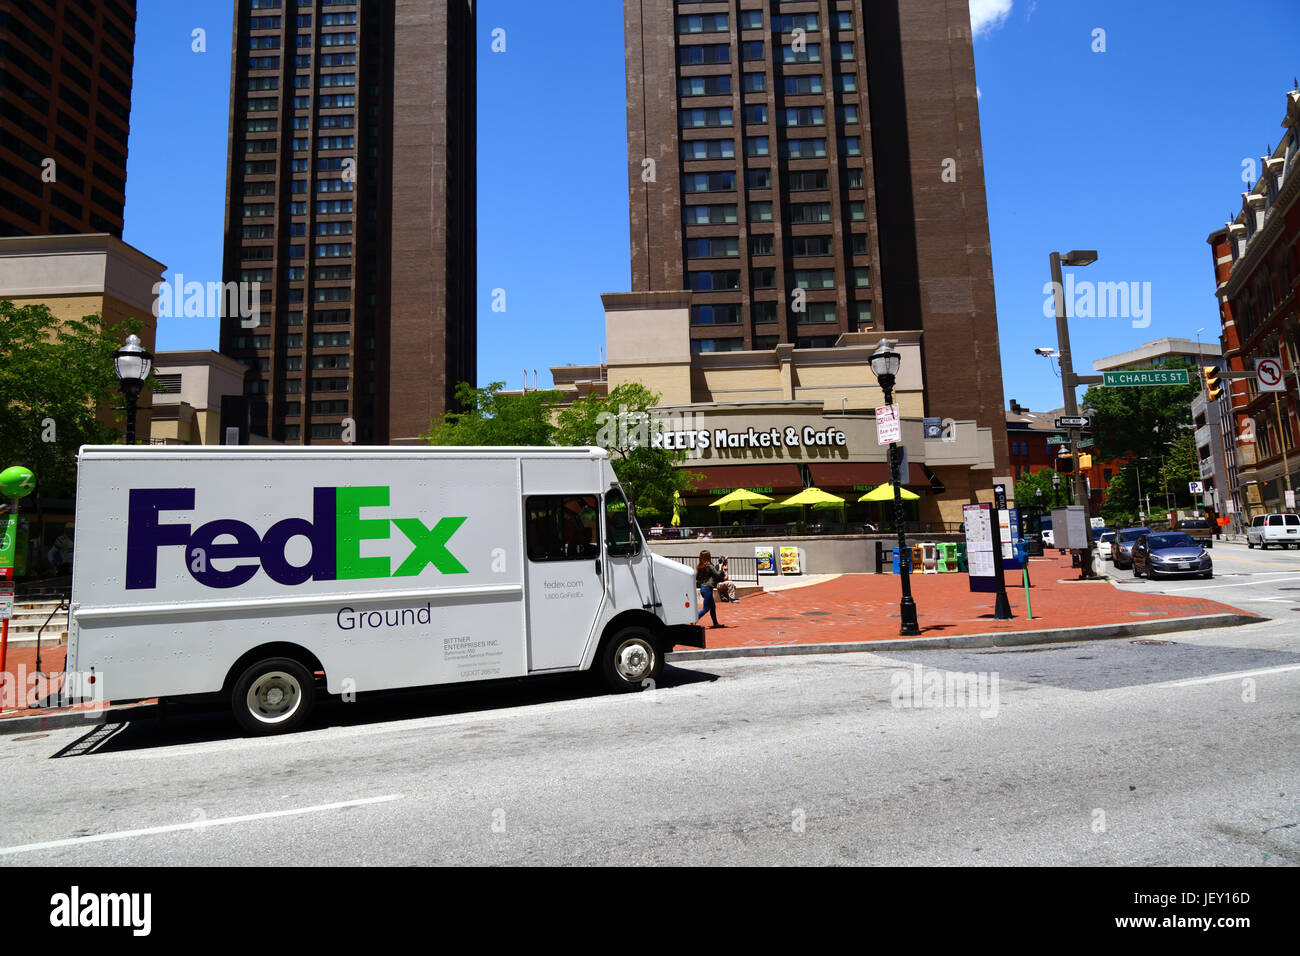 FedEx ground delivery van parked outside Streets Market and Cafe, North Charles Street, Baltimore, Maryland, USA Stock Photo